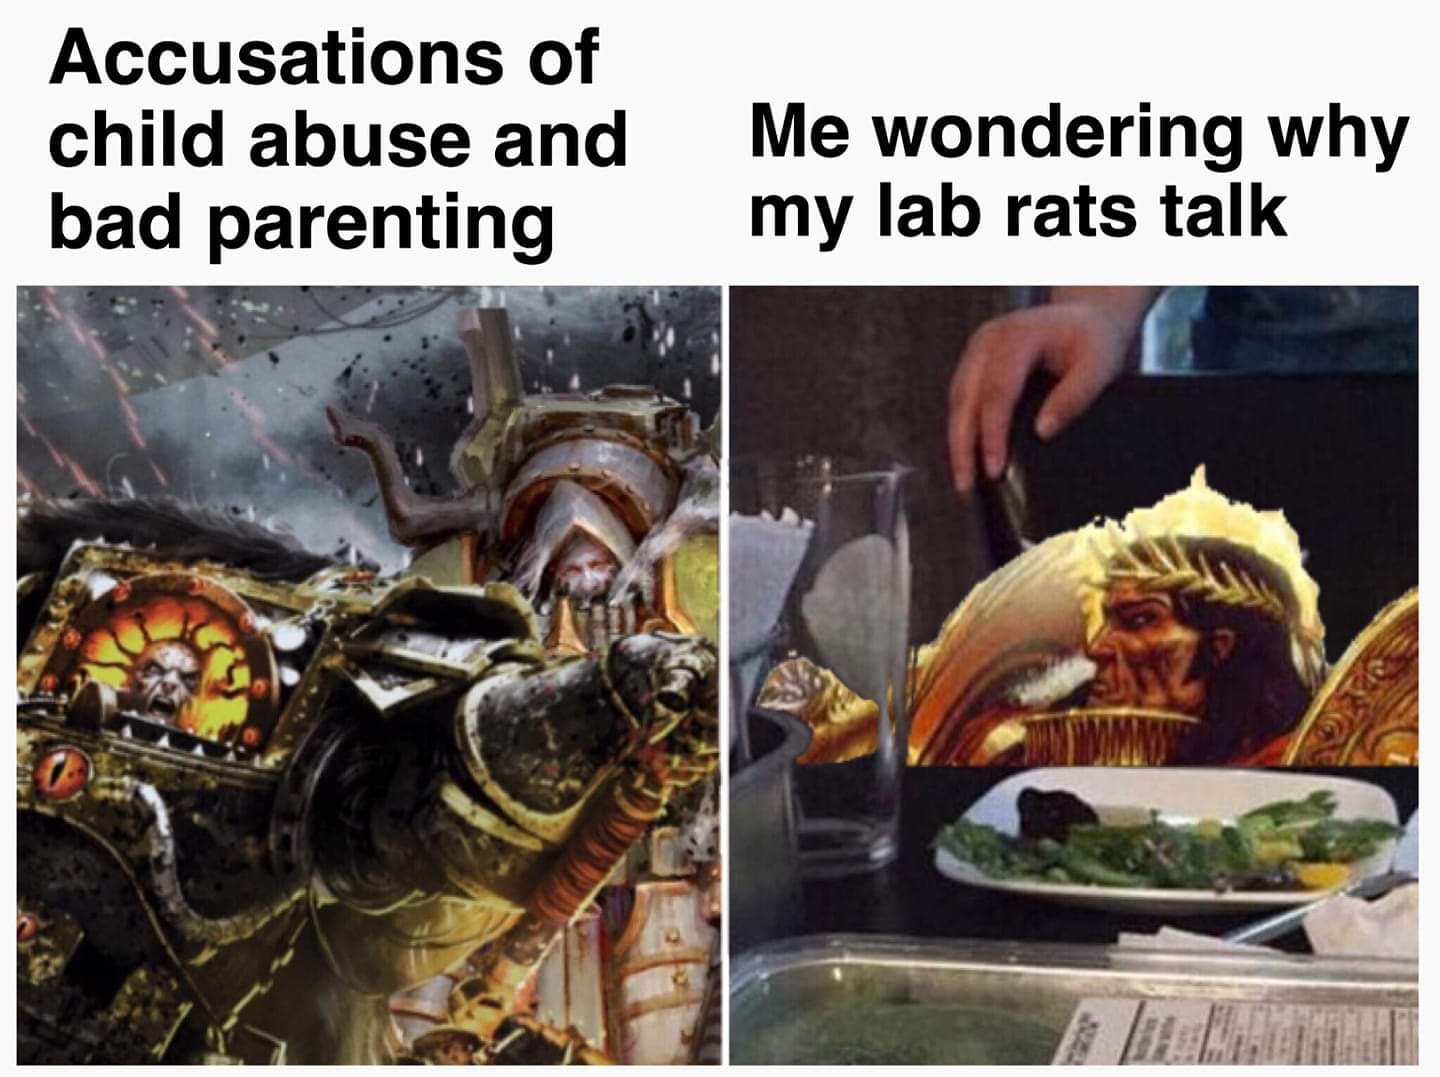 40k cat meme - Accusations of child abuse and bad parenting Me wondering why my lab rats talk